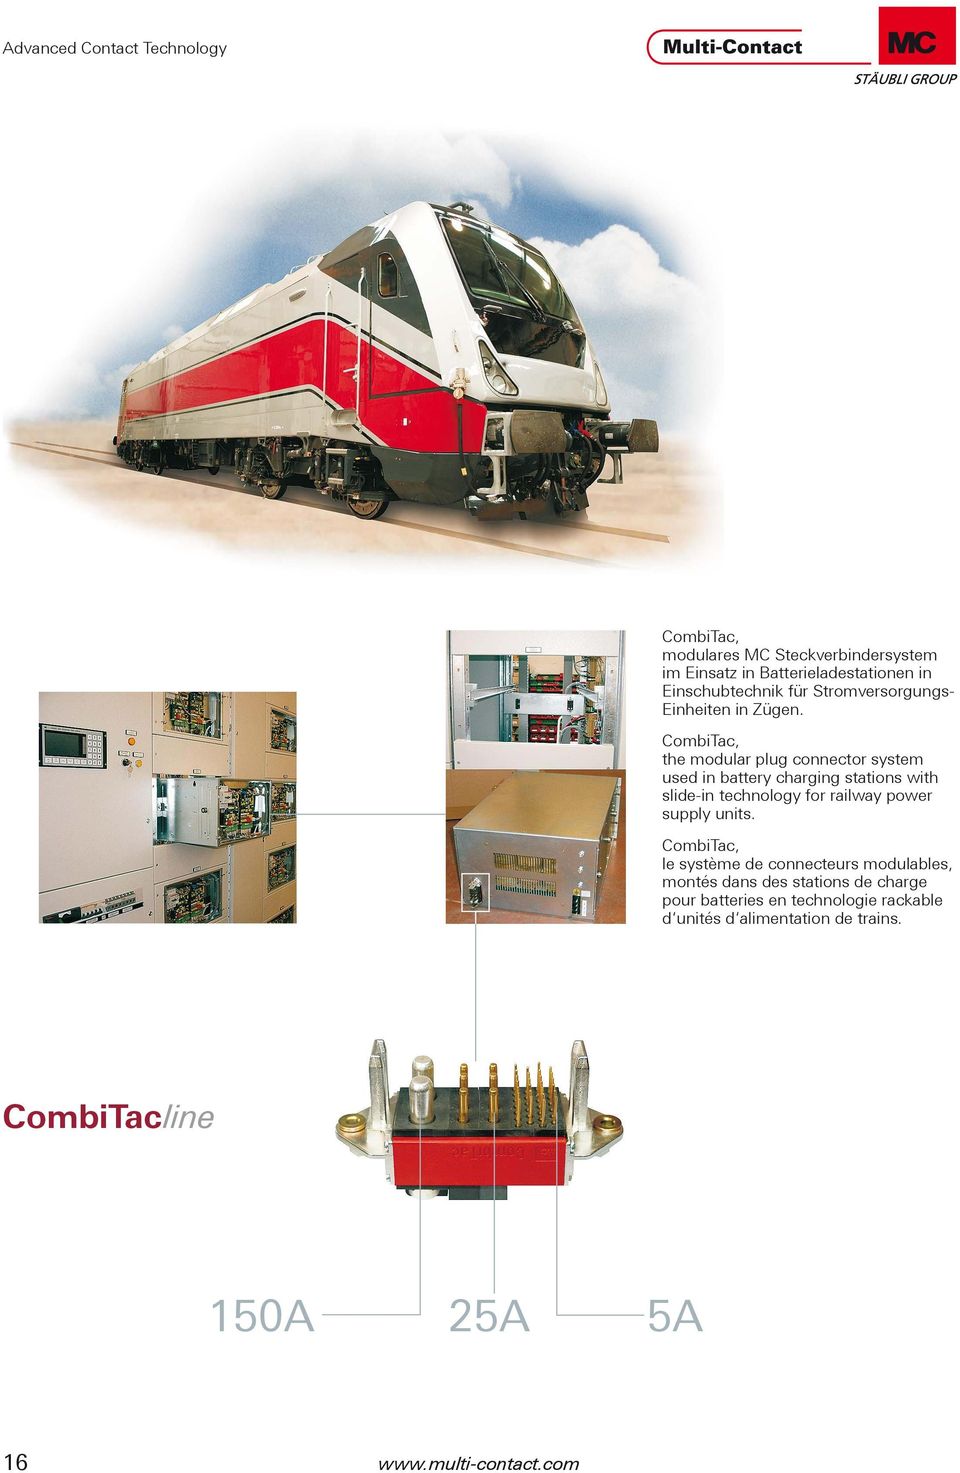 CombiTac, the modular plug connector system used in battery charging stations with slide-in technology for railway power